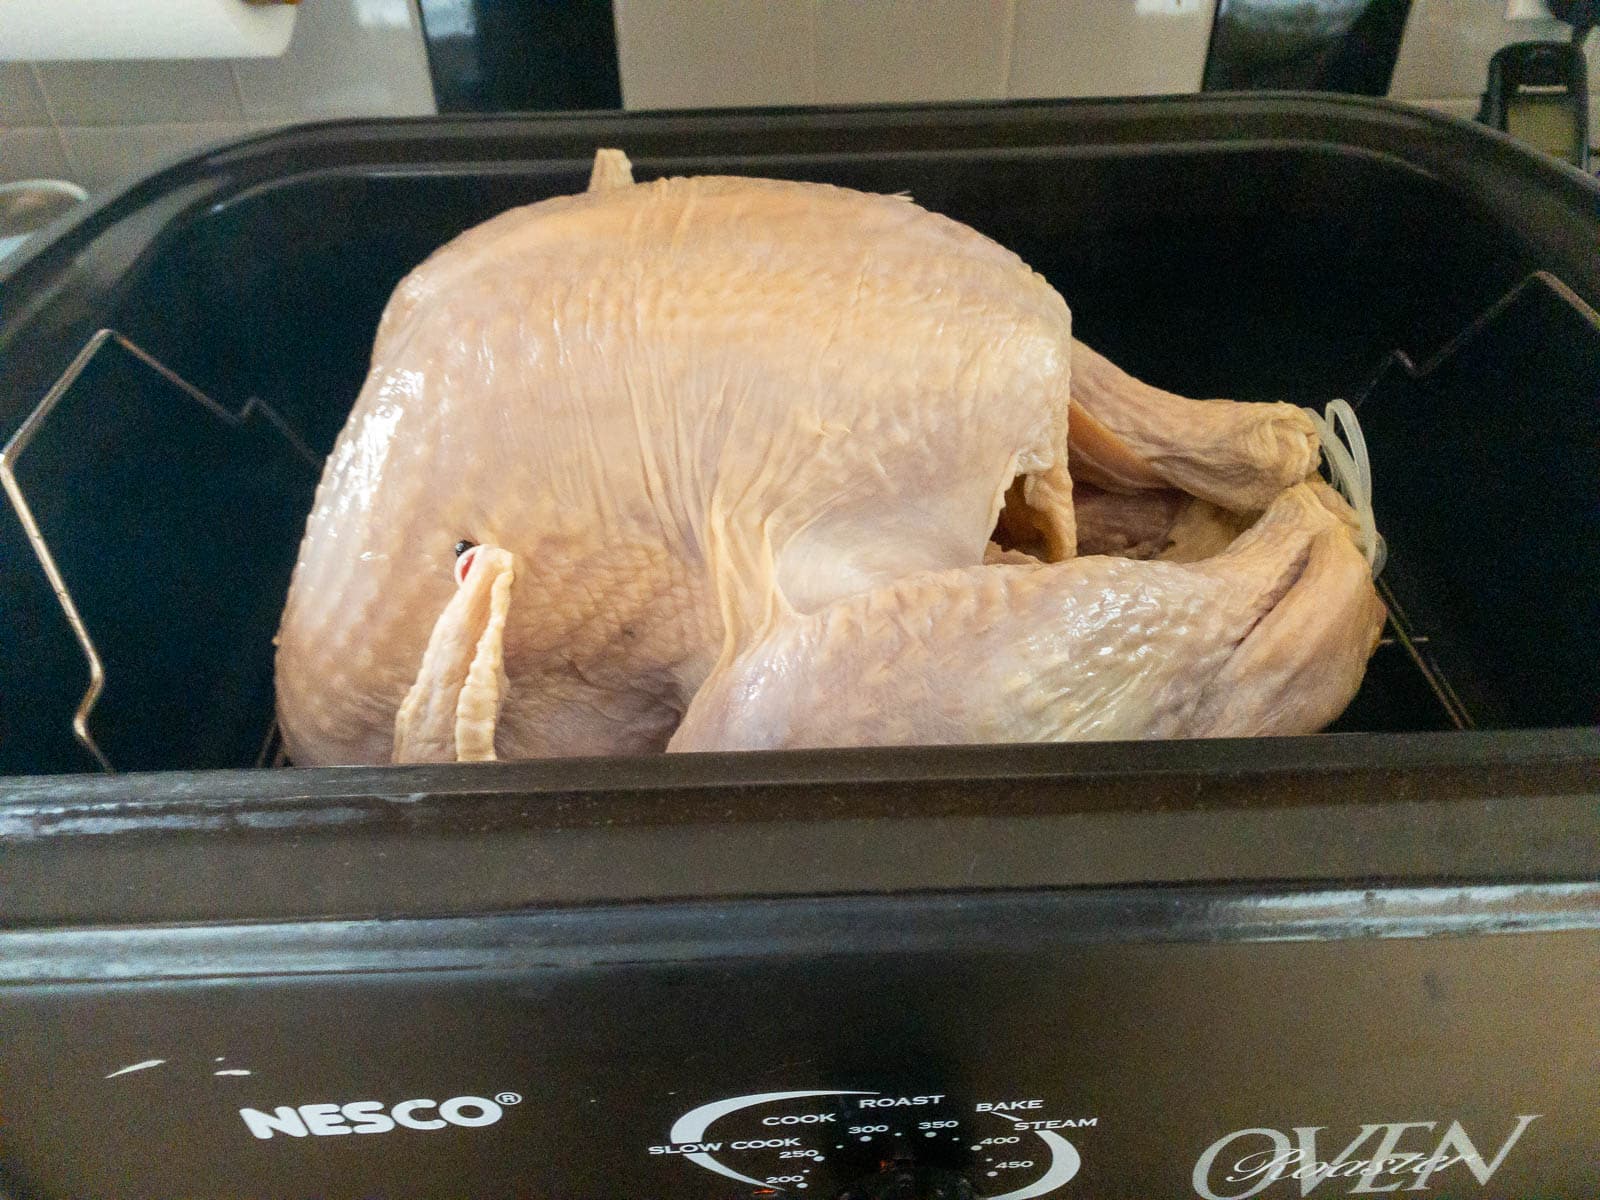 Pop Up Timer For Turkey - Take The Guess Work Out Of Cooking The Perfect  Turkey